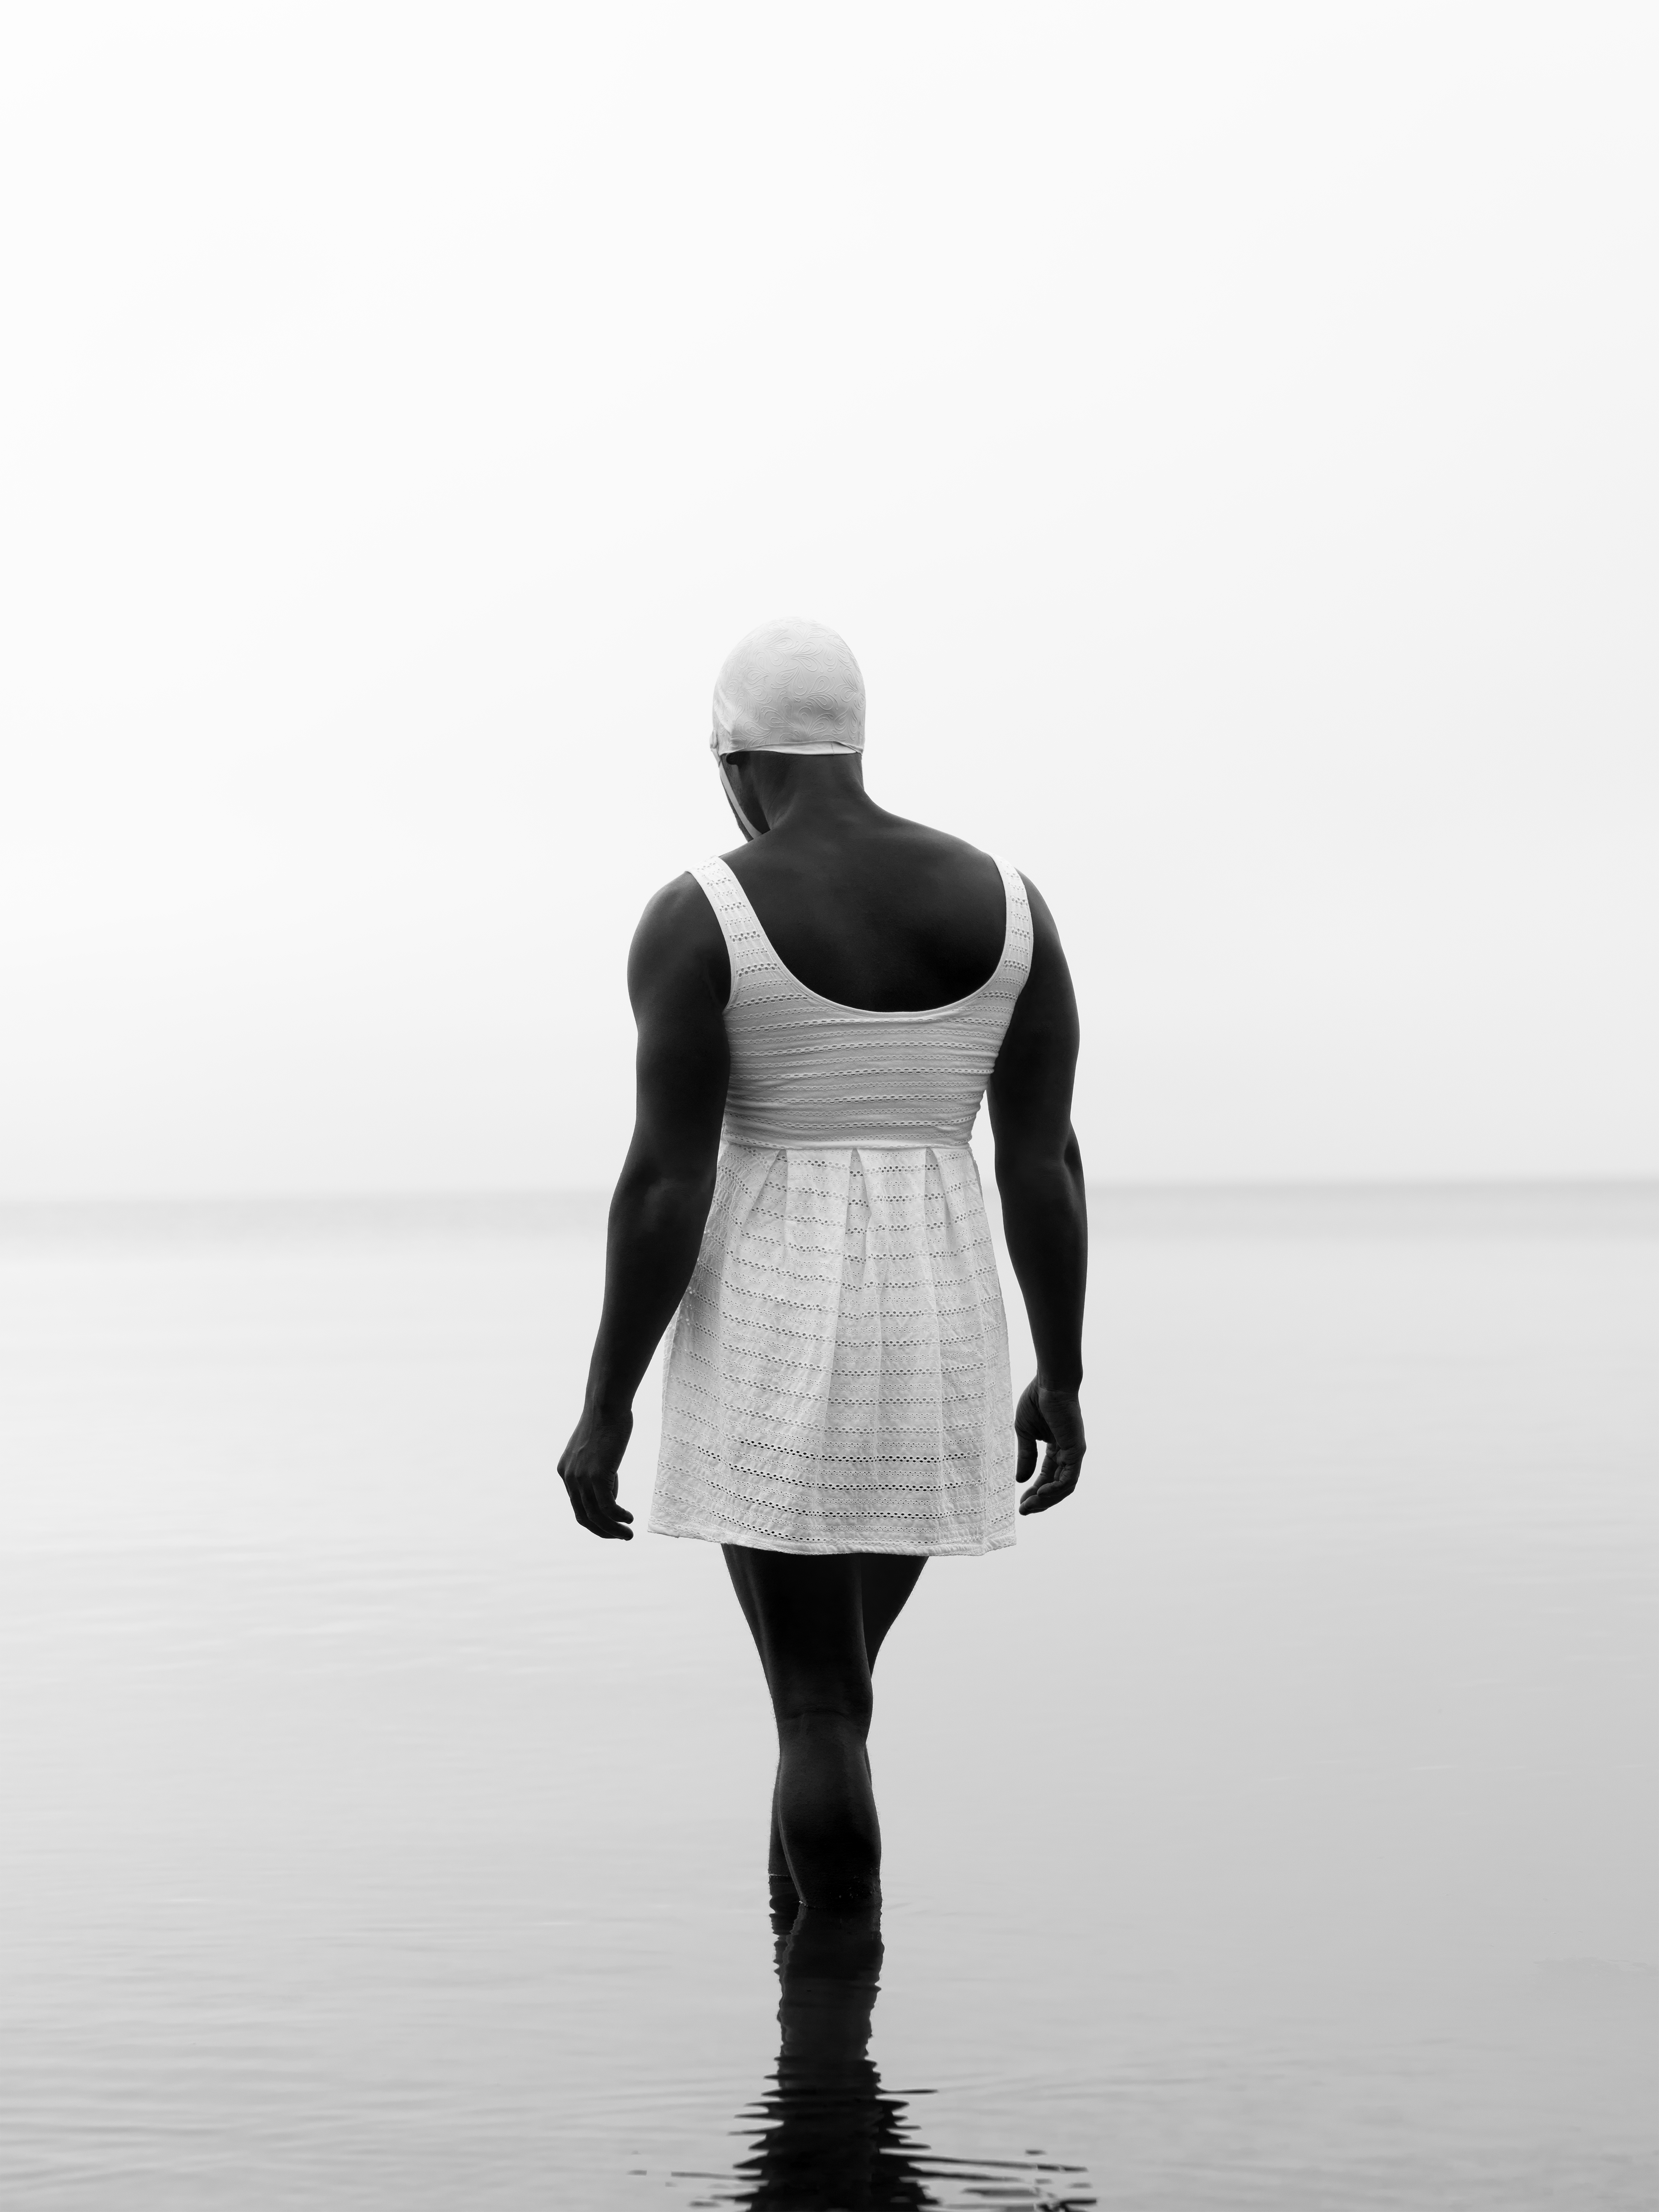  a black figure on shoaled beach stands with their back to the viewer. They are wearing a white swim dress and cap. Underneath them the water is still, and sky is clear. The ripple of their shadow trails off into the bottom of the image. 